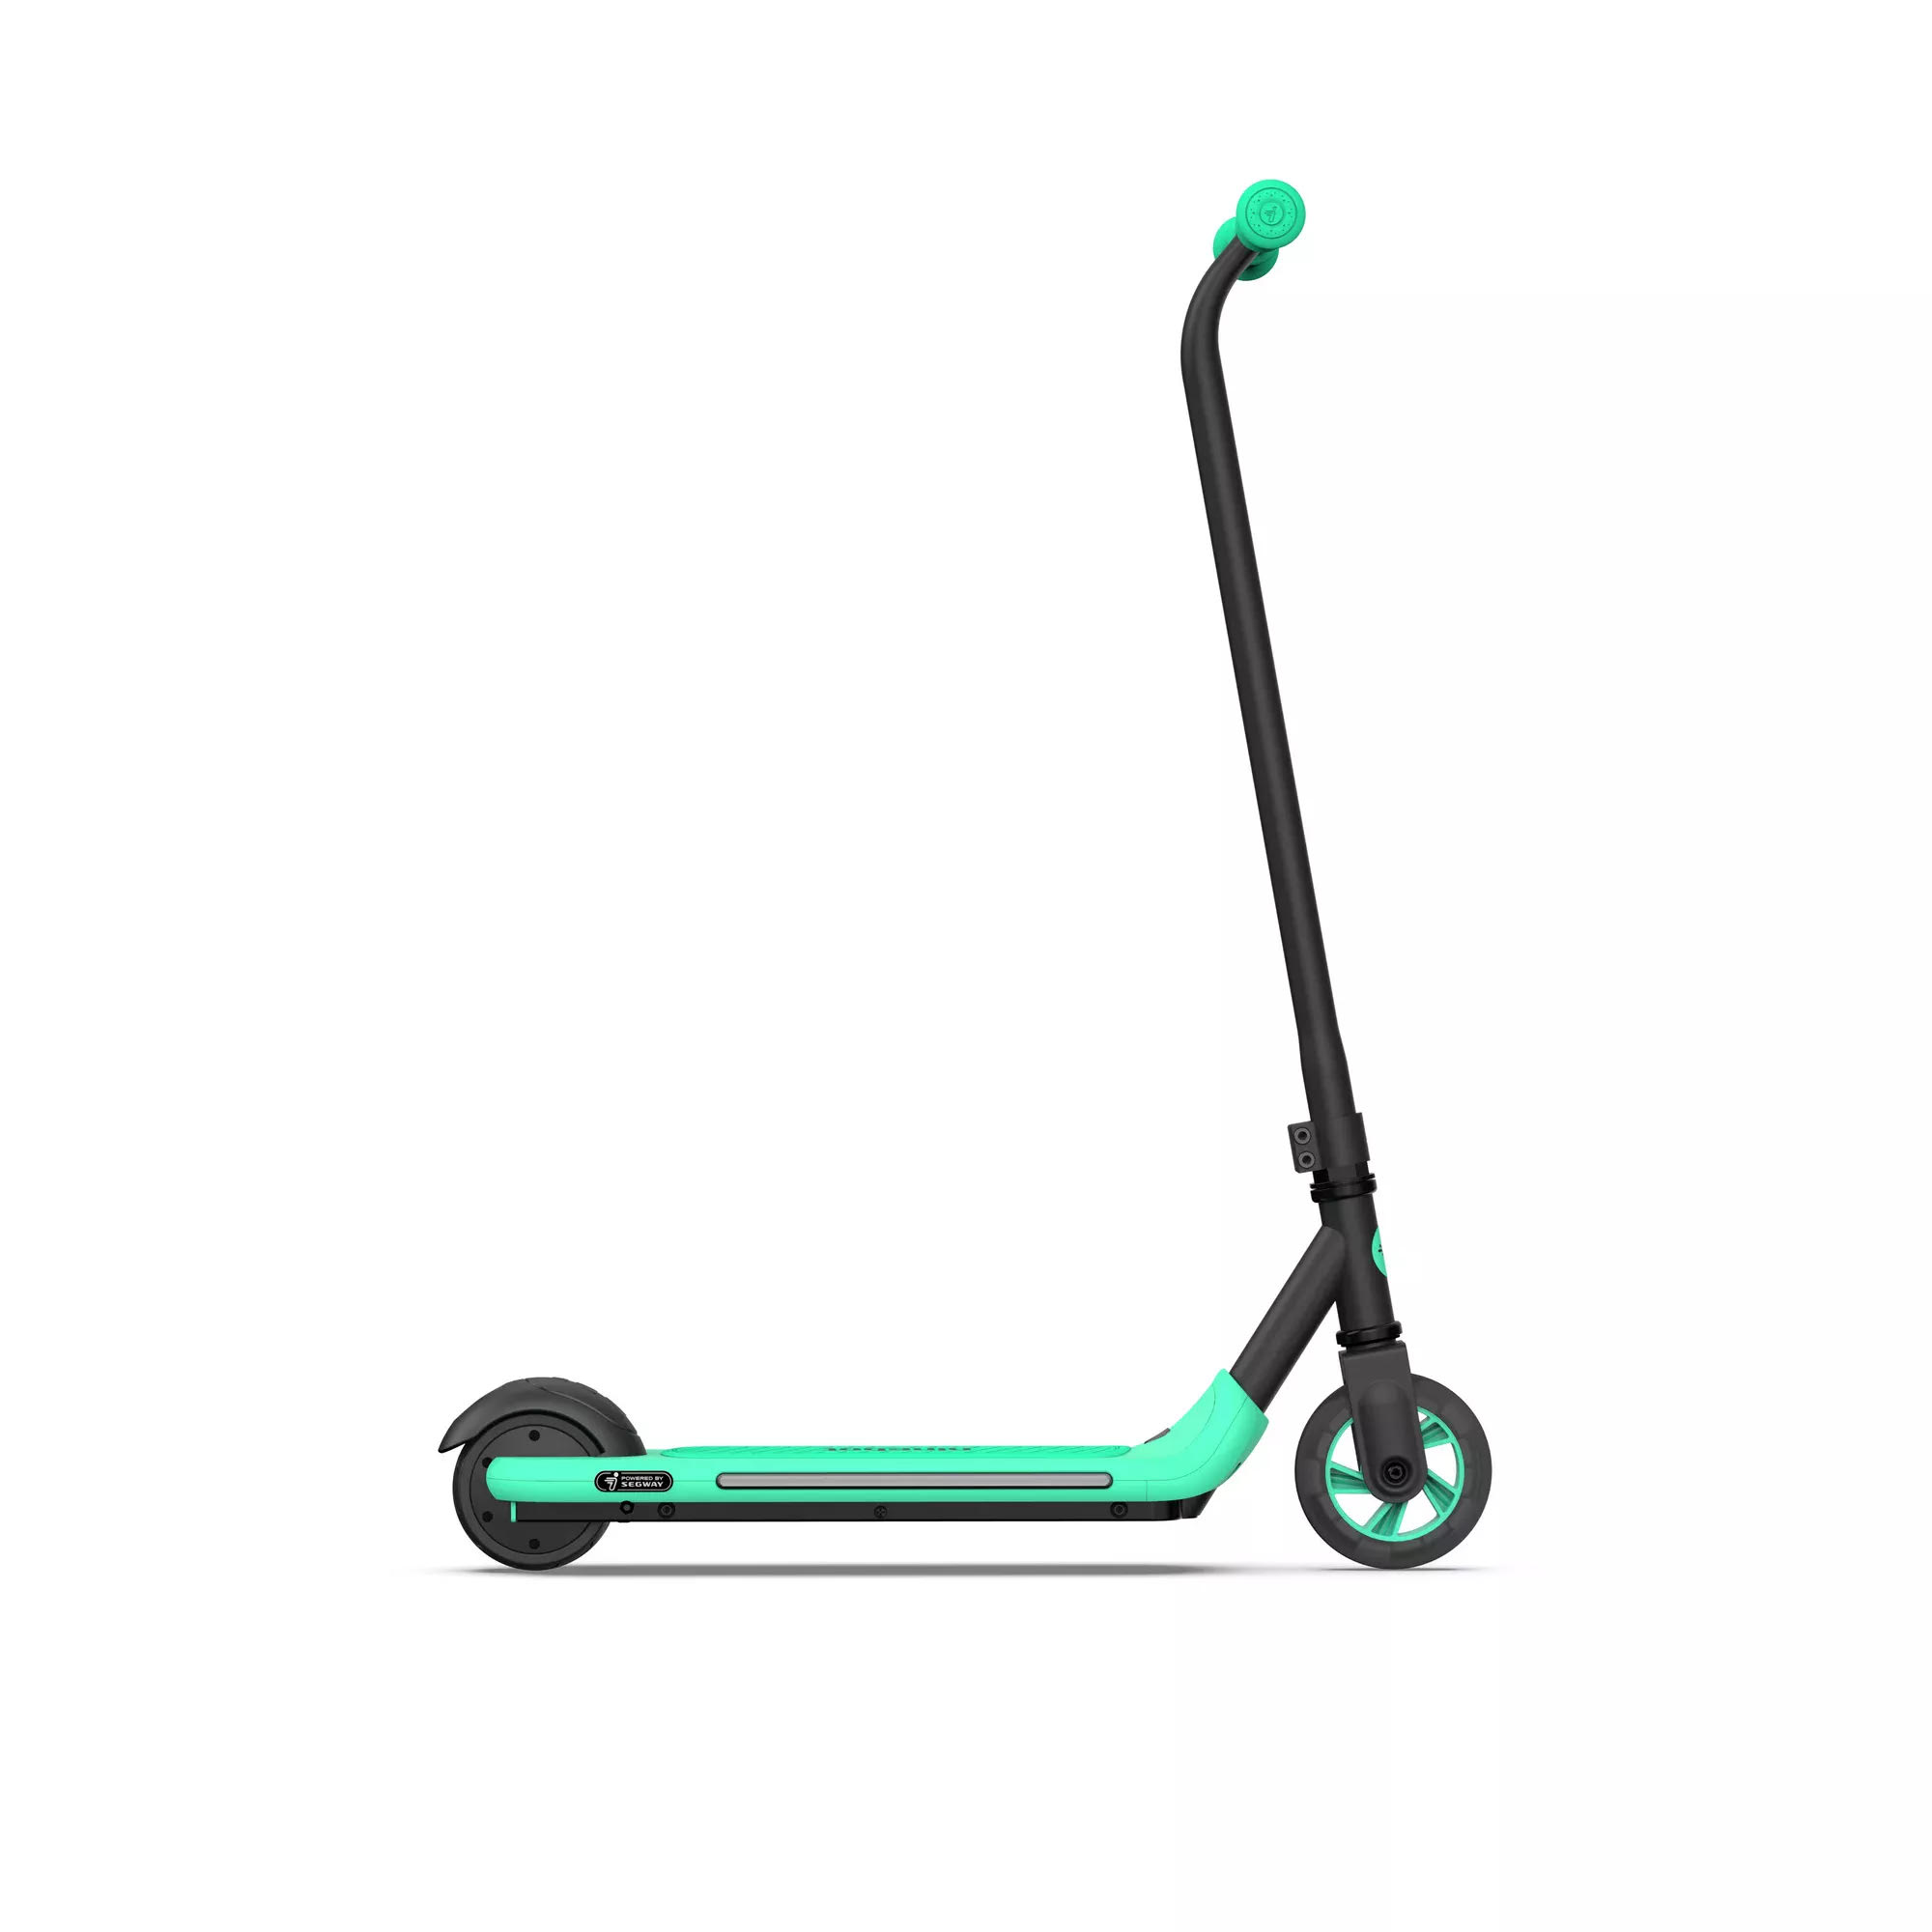 Segway Ninebot A6 Electric Kick Scooter for Kids USASegway Ninebot A6 Electric Kick Scooter for Kids USA